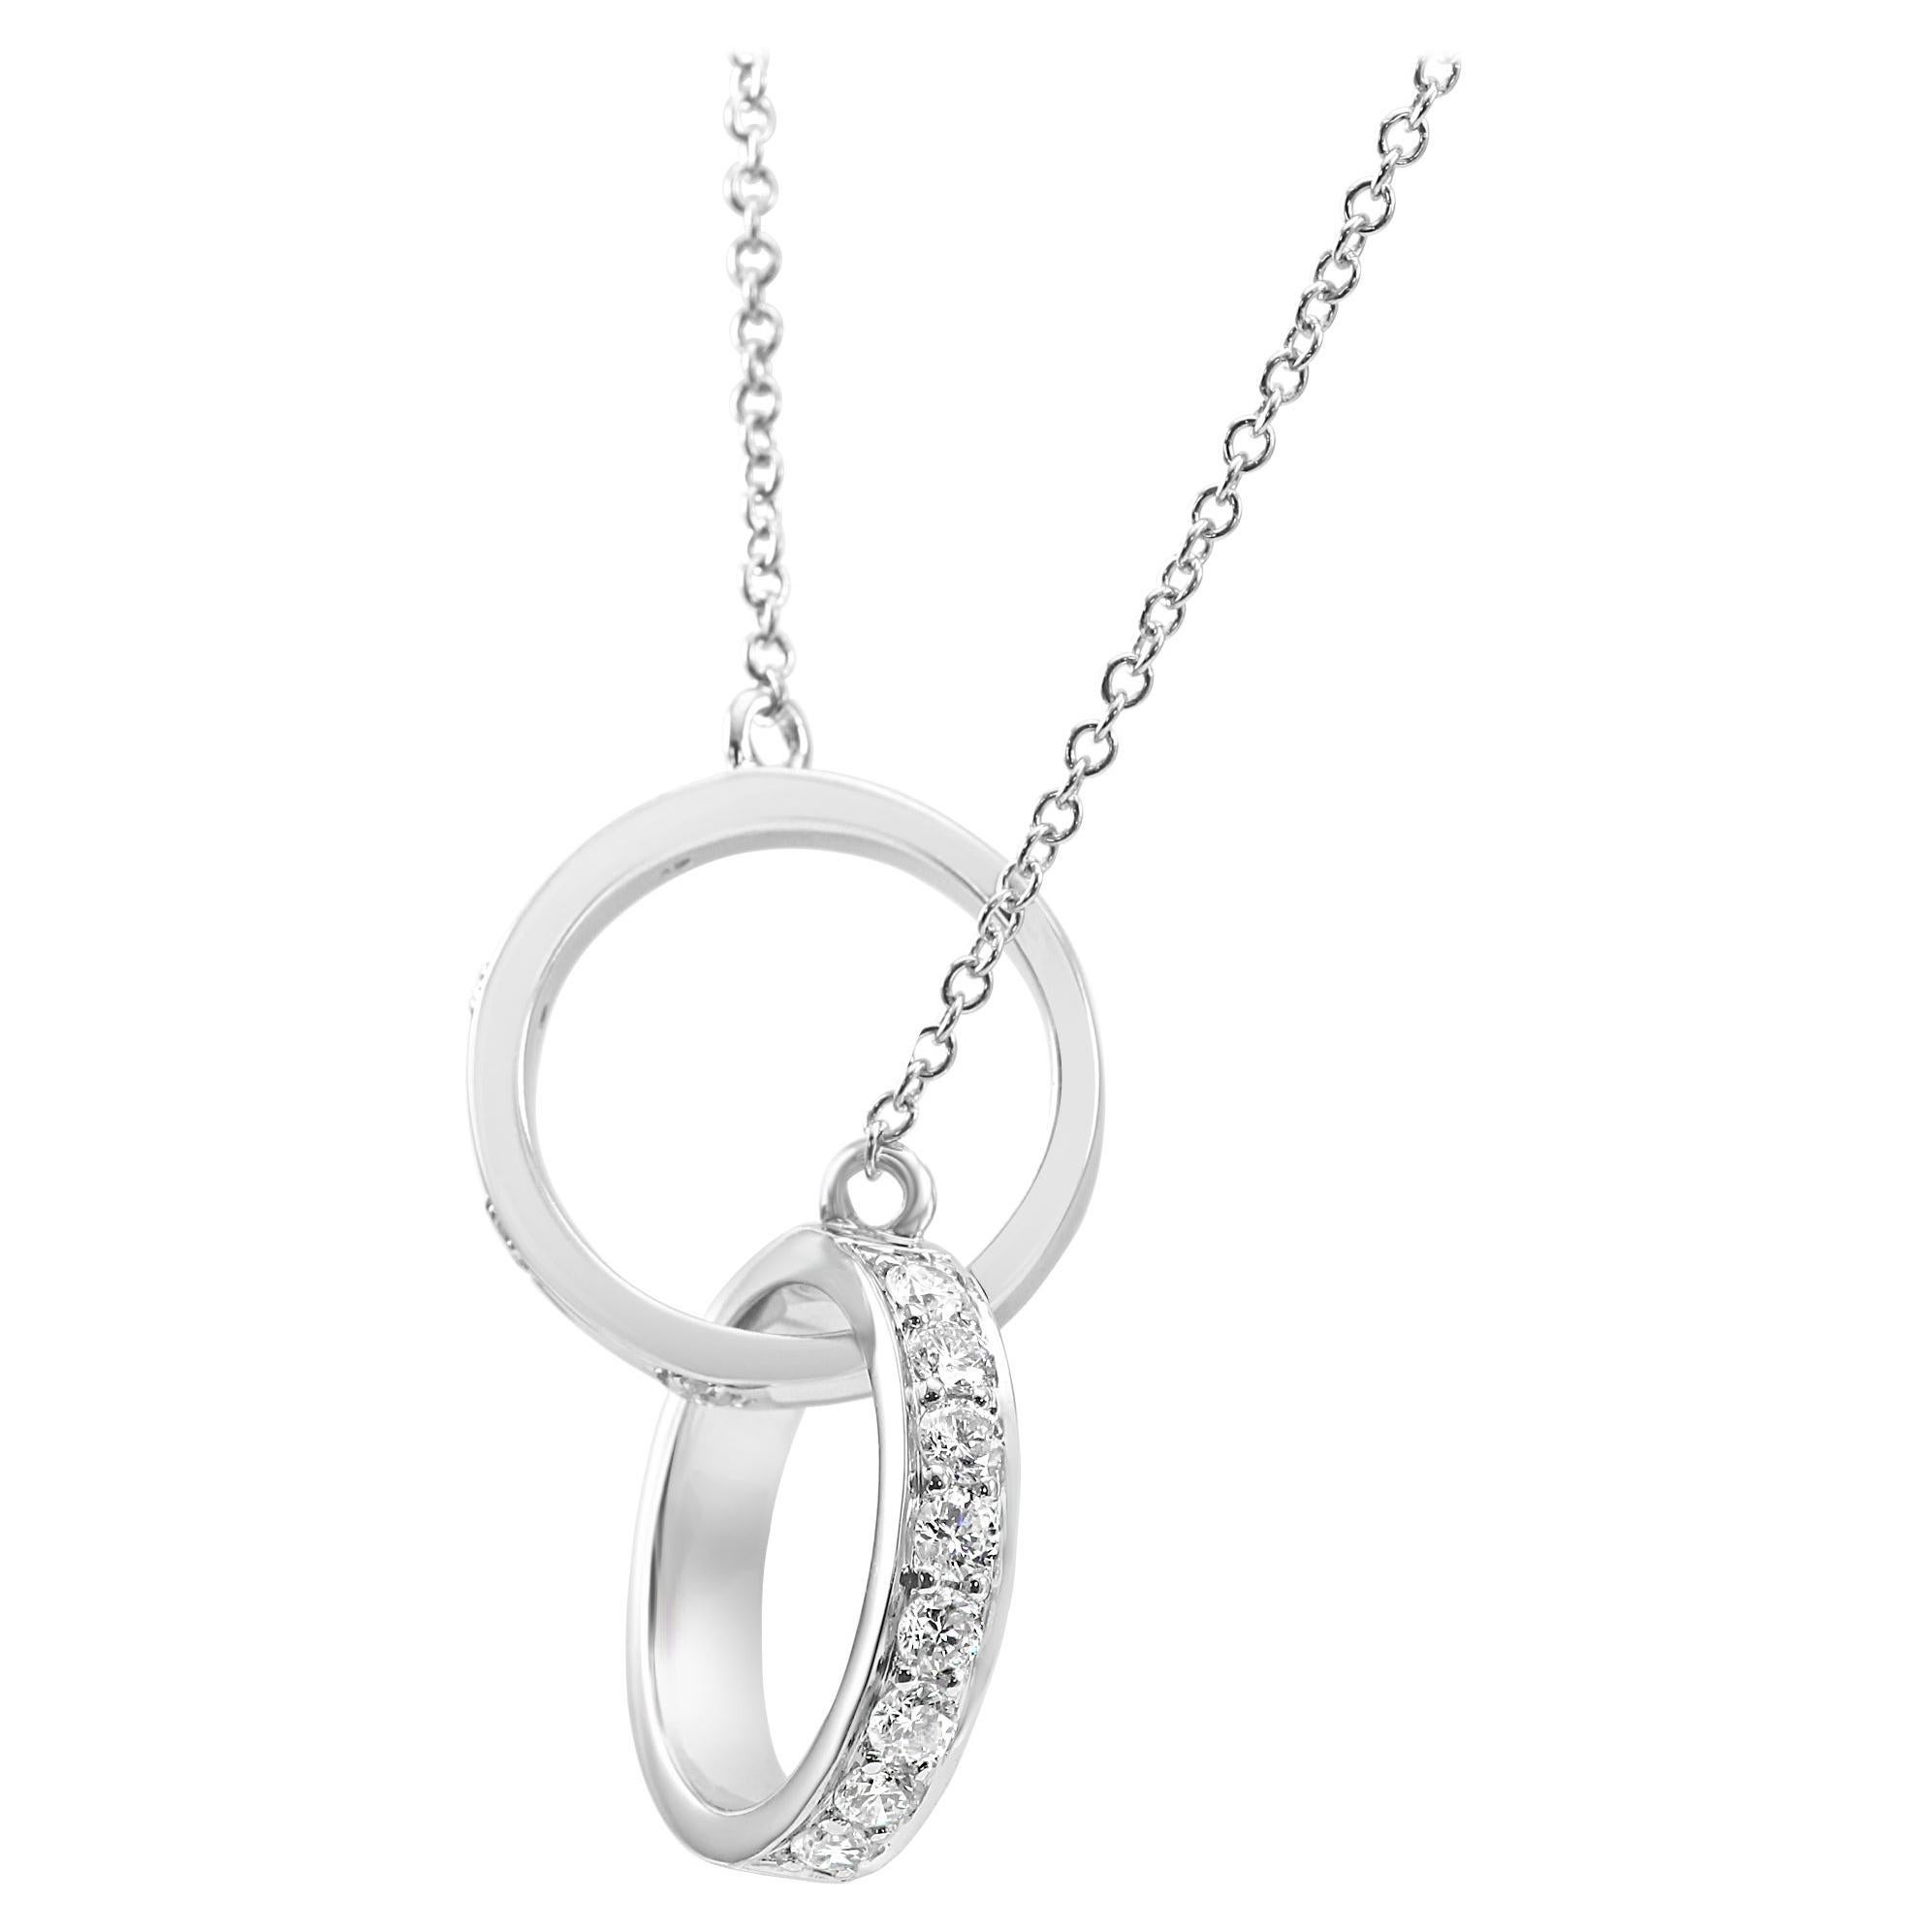 White Diamond Round Entwined Ring Drop Fashion 14K White Gold Stackable Necklace